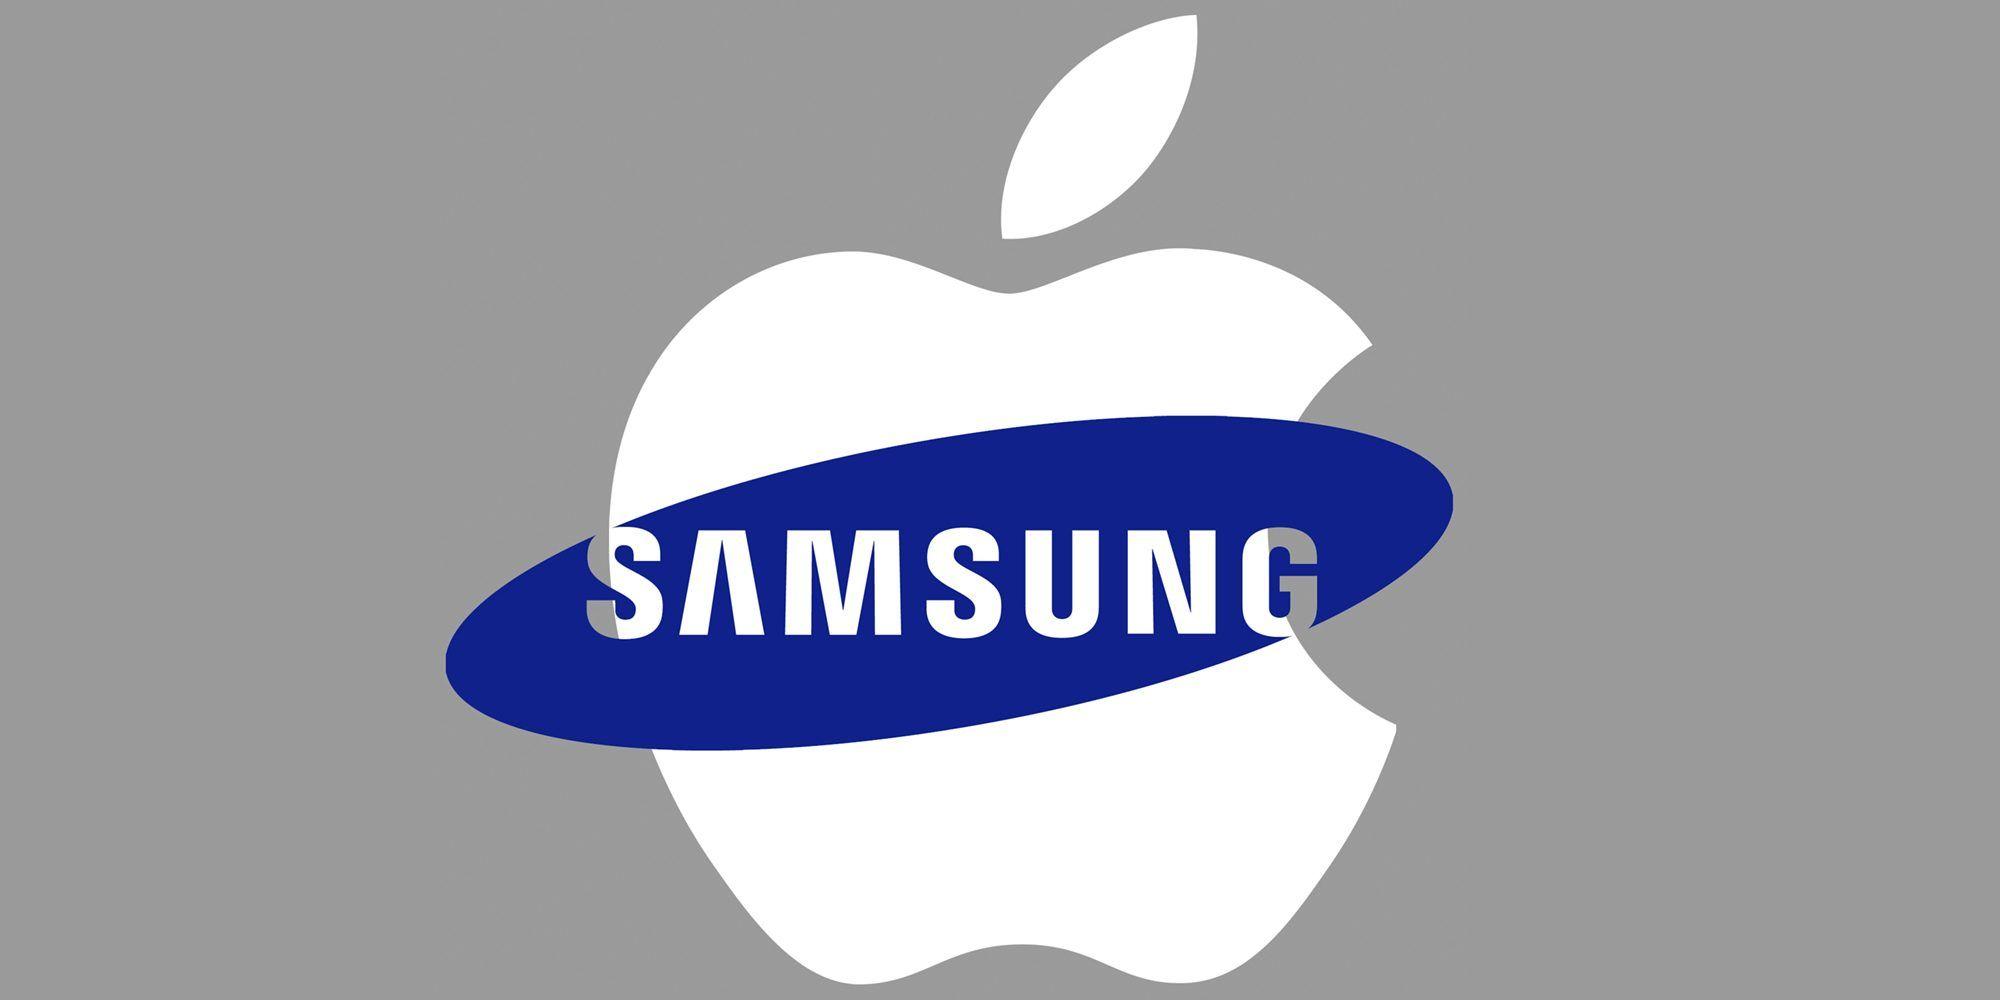 Samsung Apple Logo - Samsung Launched 31 Phones Last Year, but Apple Has the Upper Hand